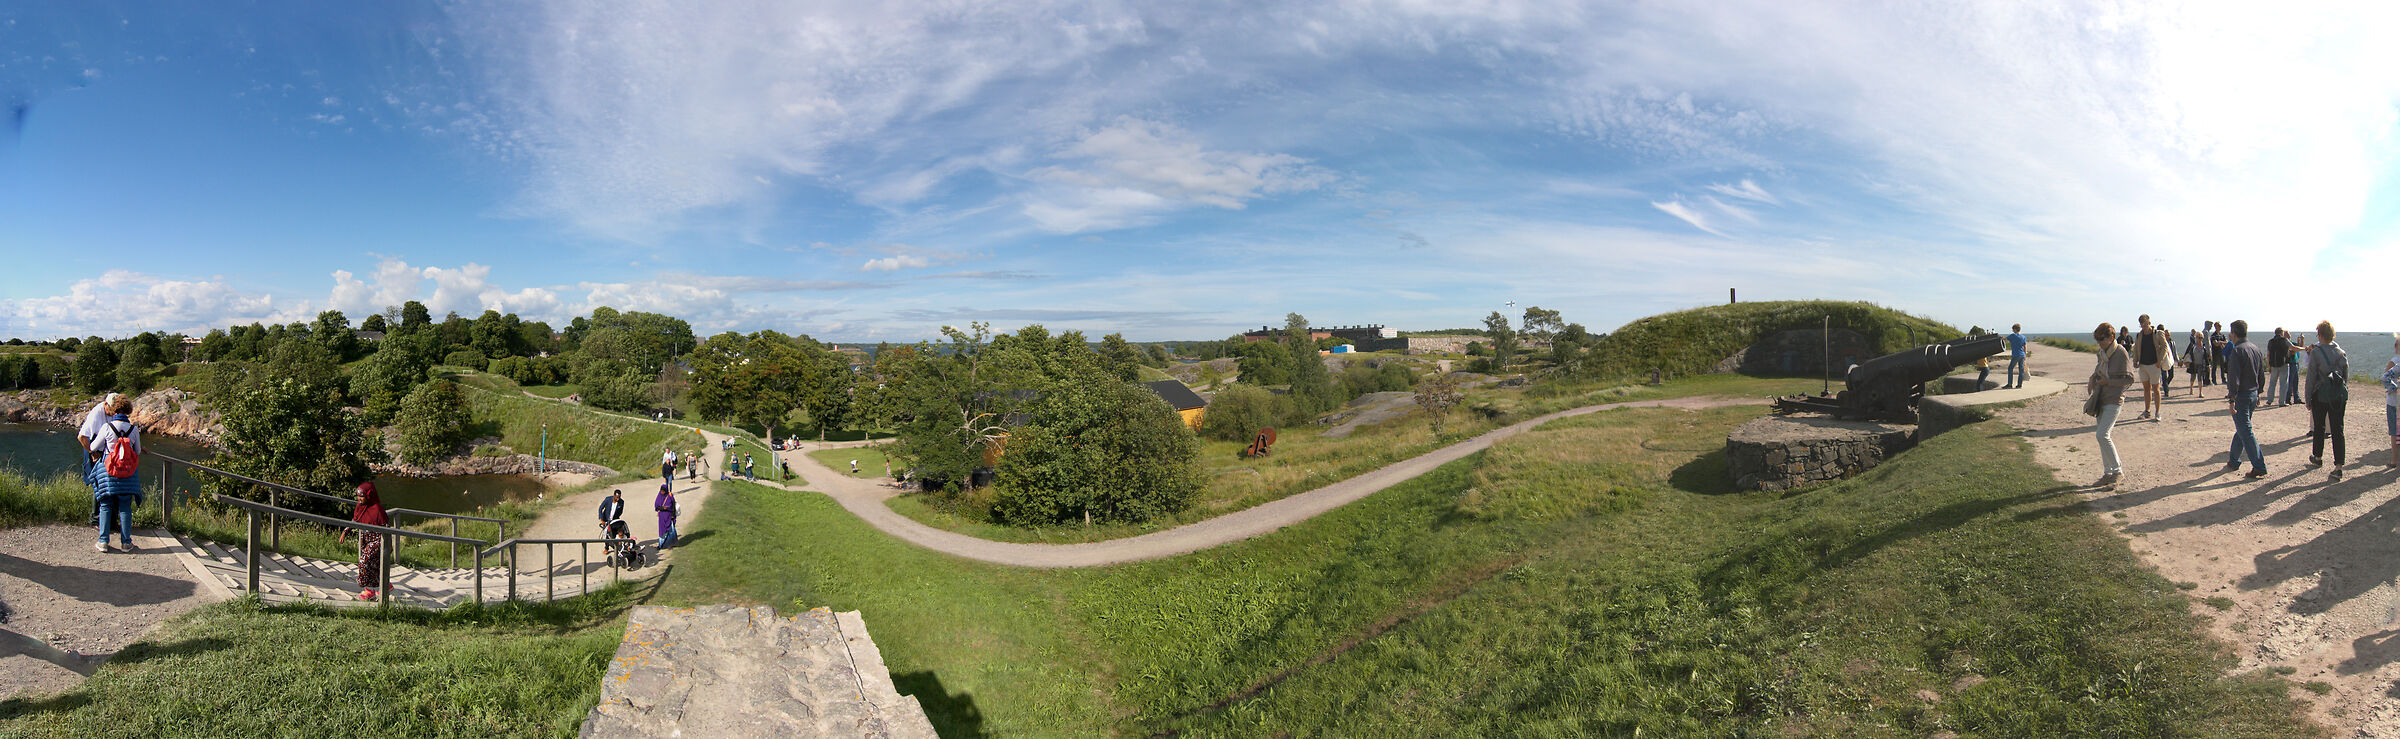 Overview 2 - SUOMENLINNA - A fortress on the water...